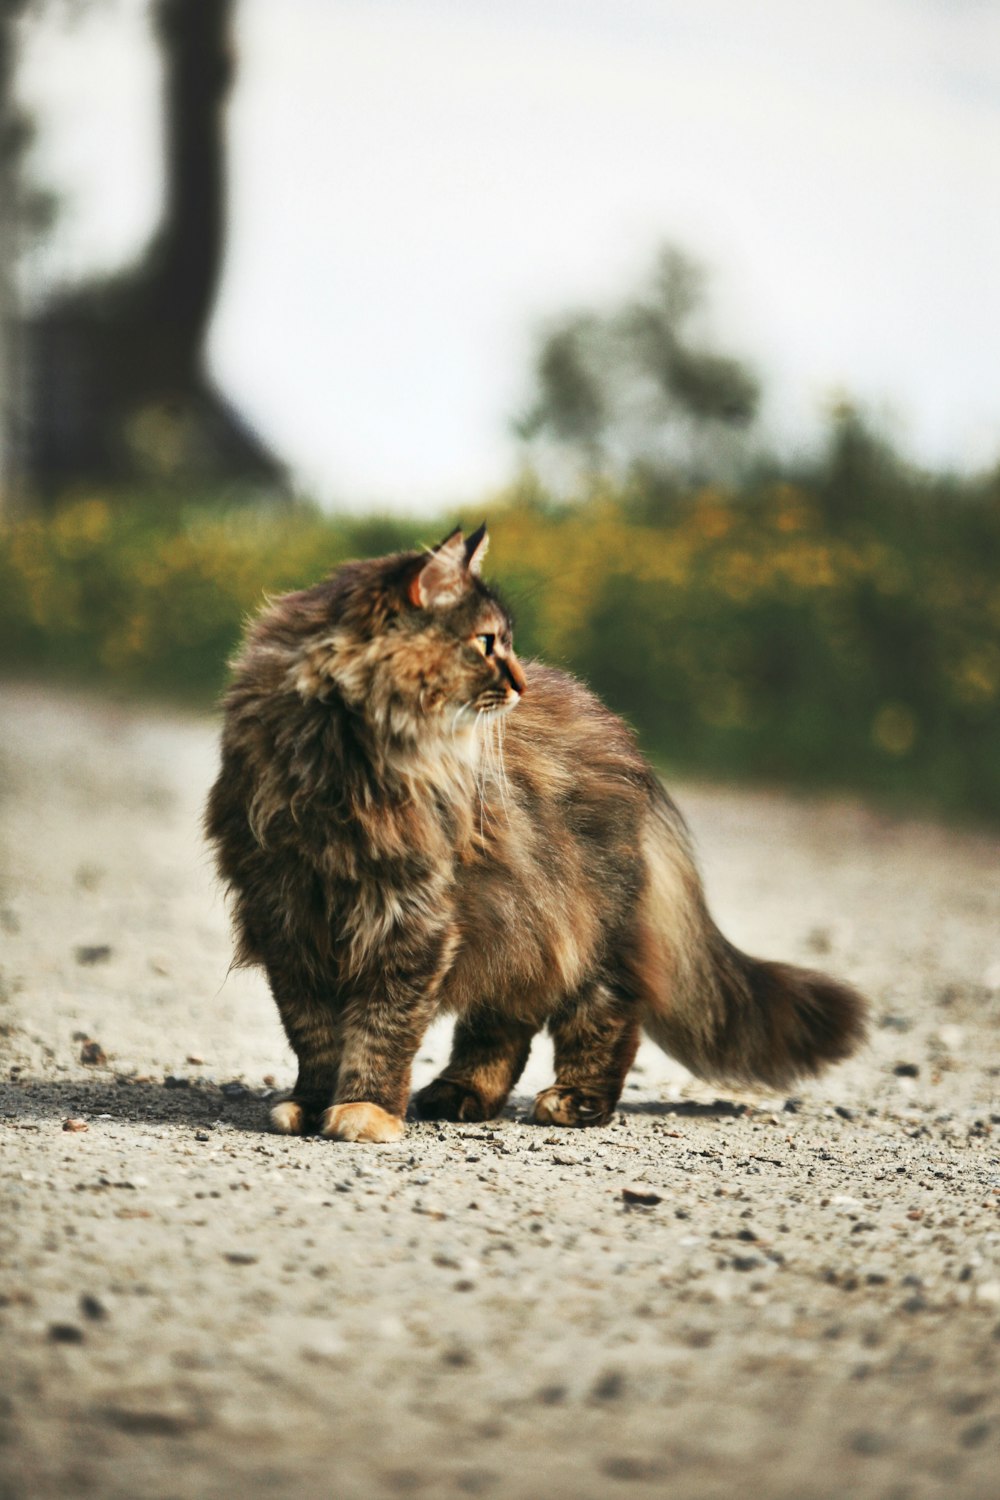 a long haired cat walking across a gravel road